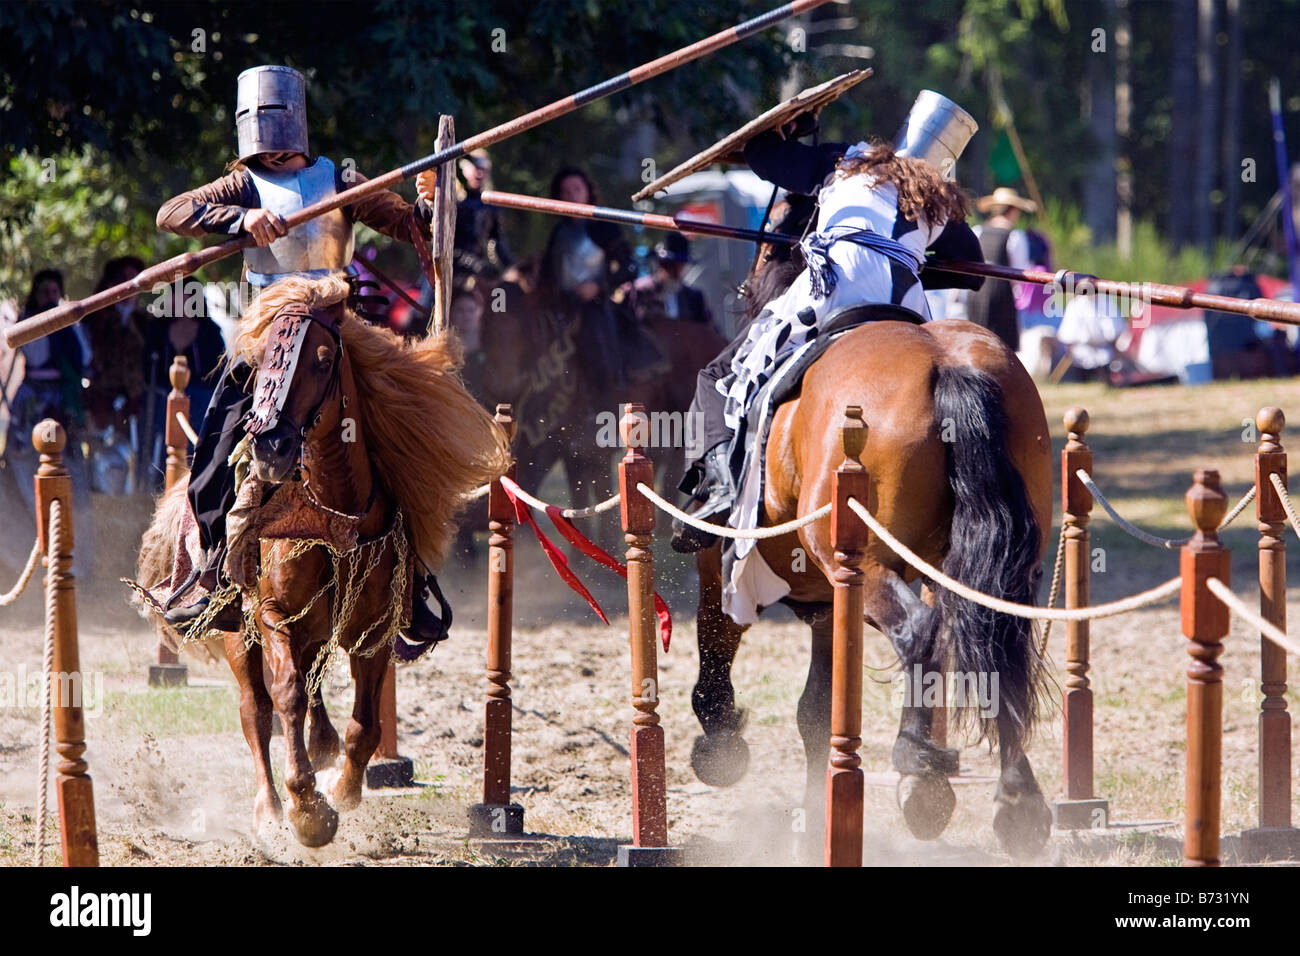 Image of two men dressed in Medieval style clothing riding a horse and carrying a lance in a jousting tournament Stock Photo